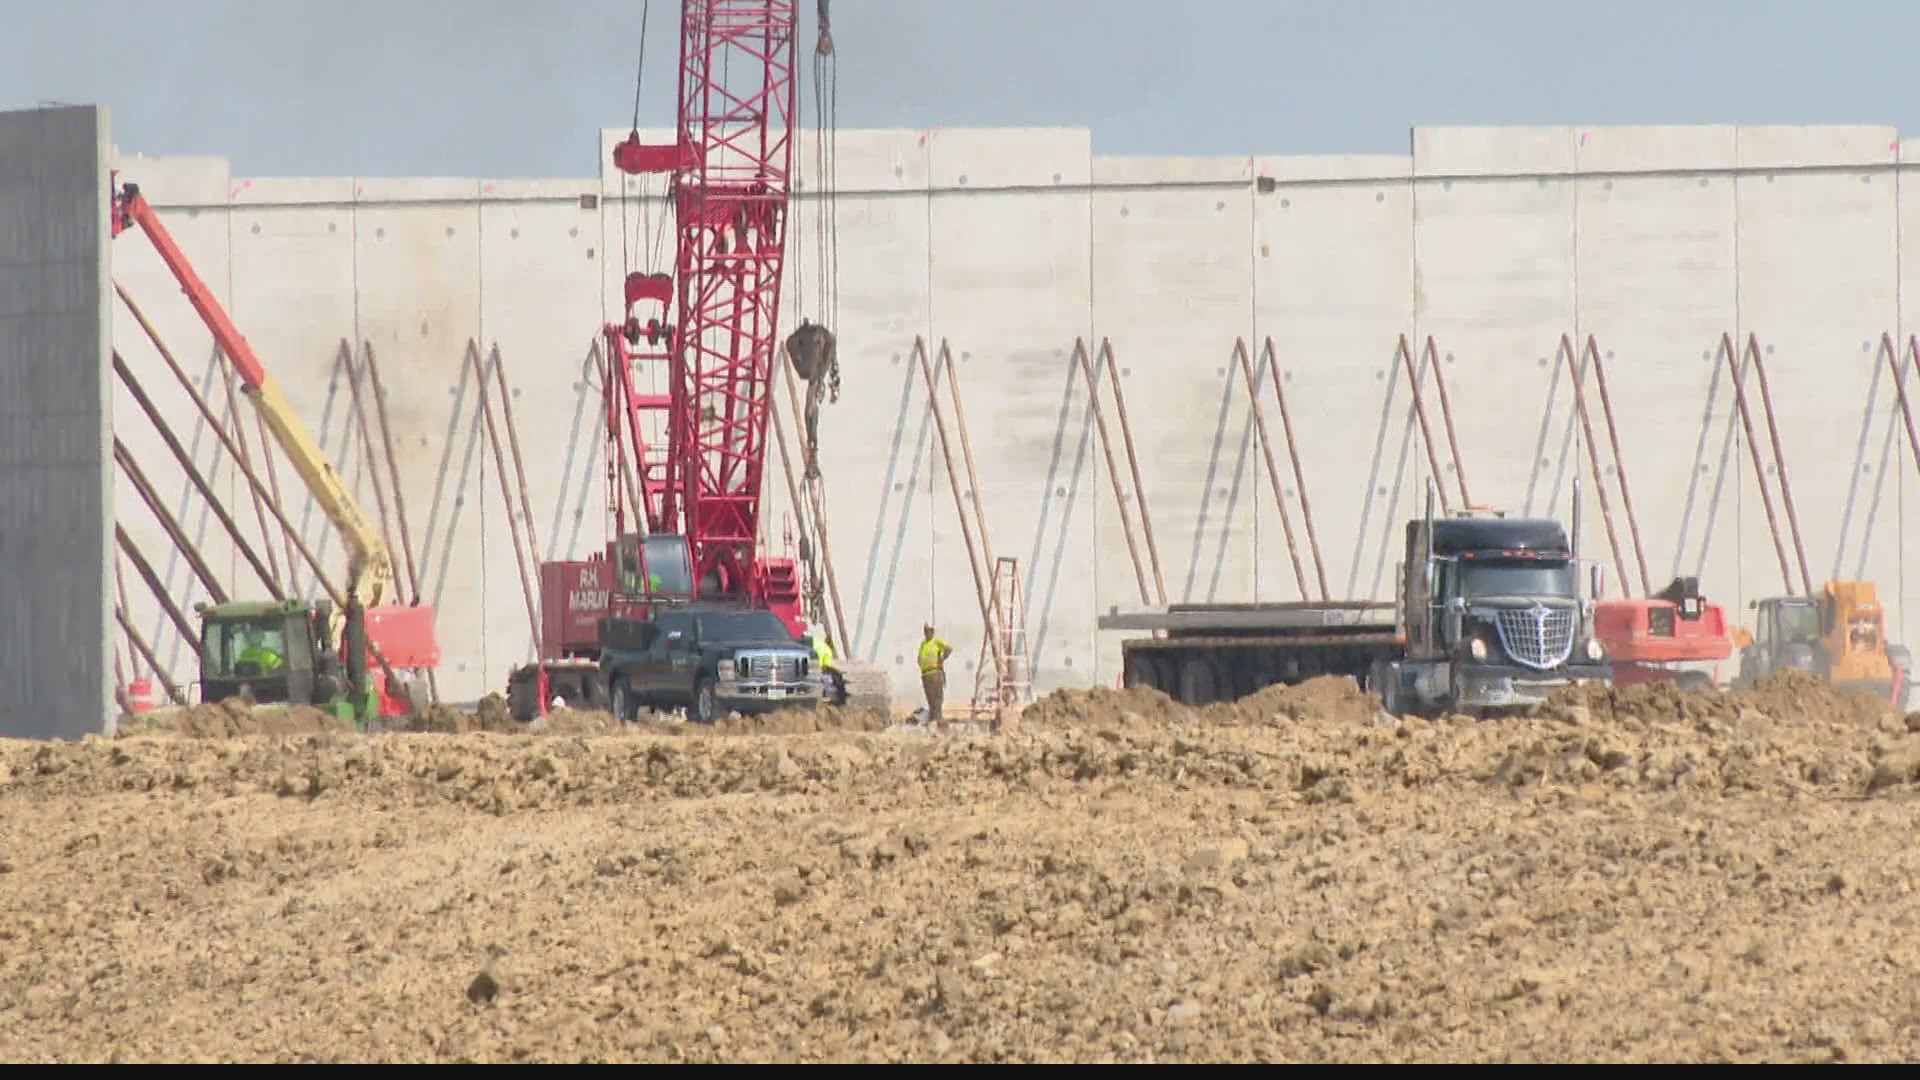 The project promises millions of dollars in revenue, but some neighbors are worried about adding too many more warehouses in Whiteland.